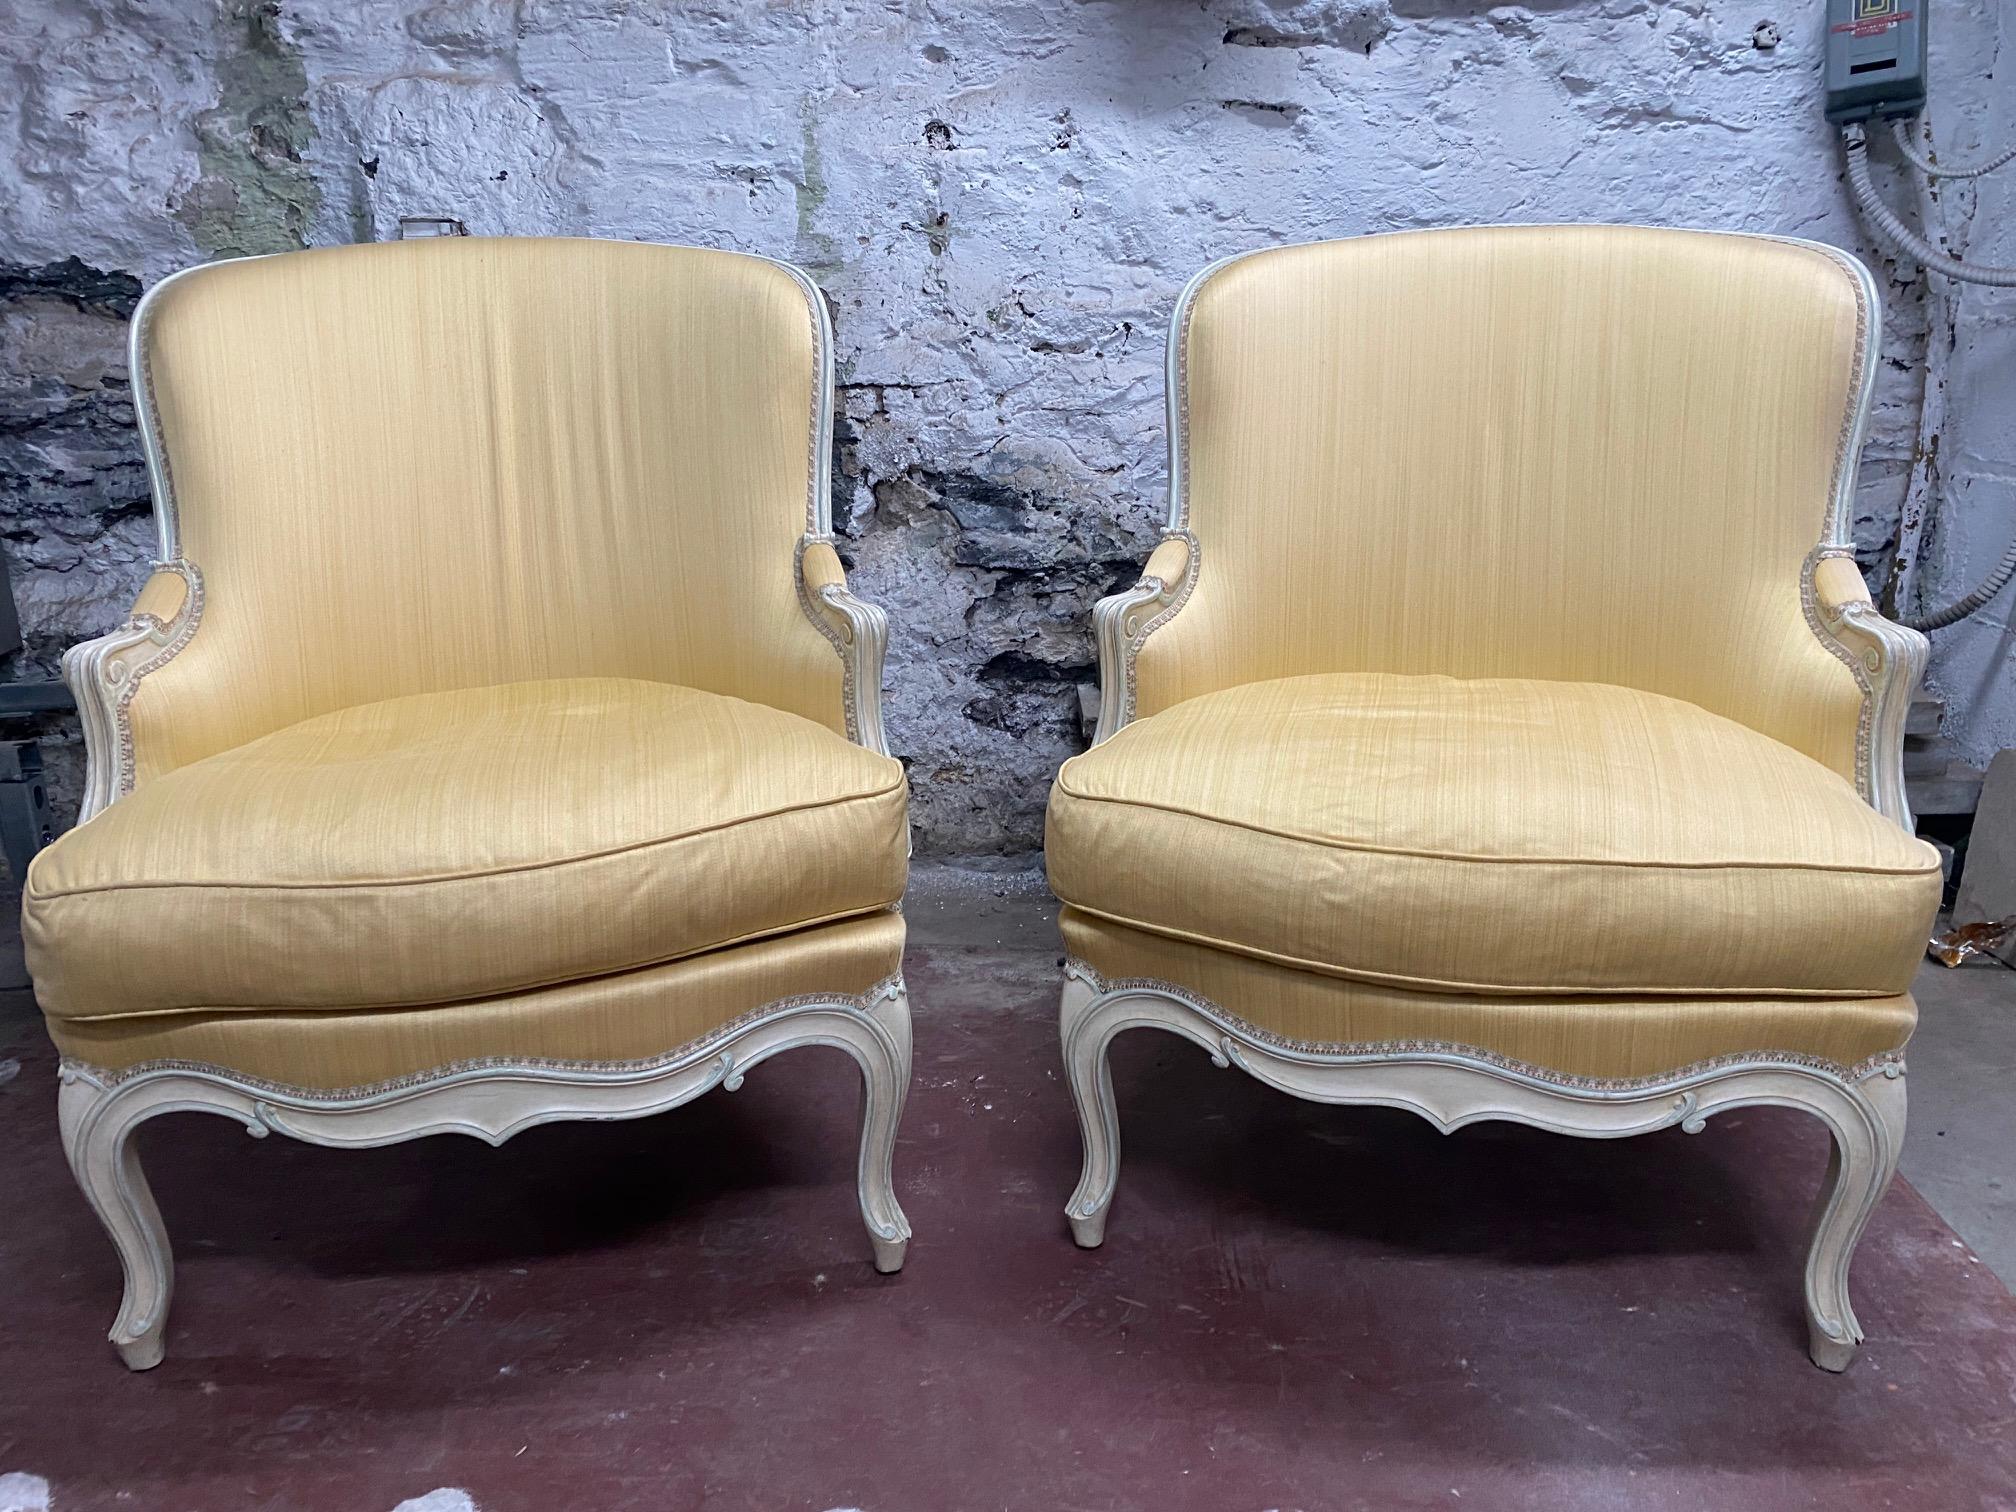 Pair of Louis XV style yellow upholstered painted wood bergère Chairs.
Measure: Seat height 17.5 in.